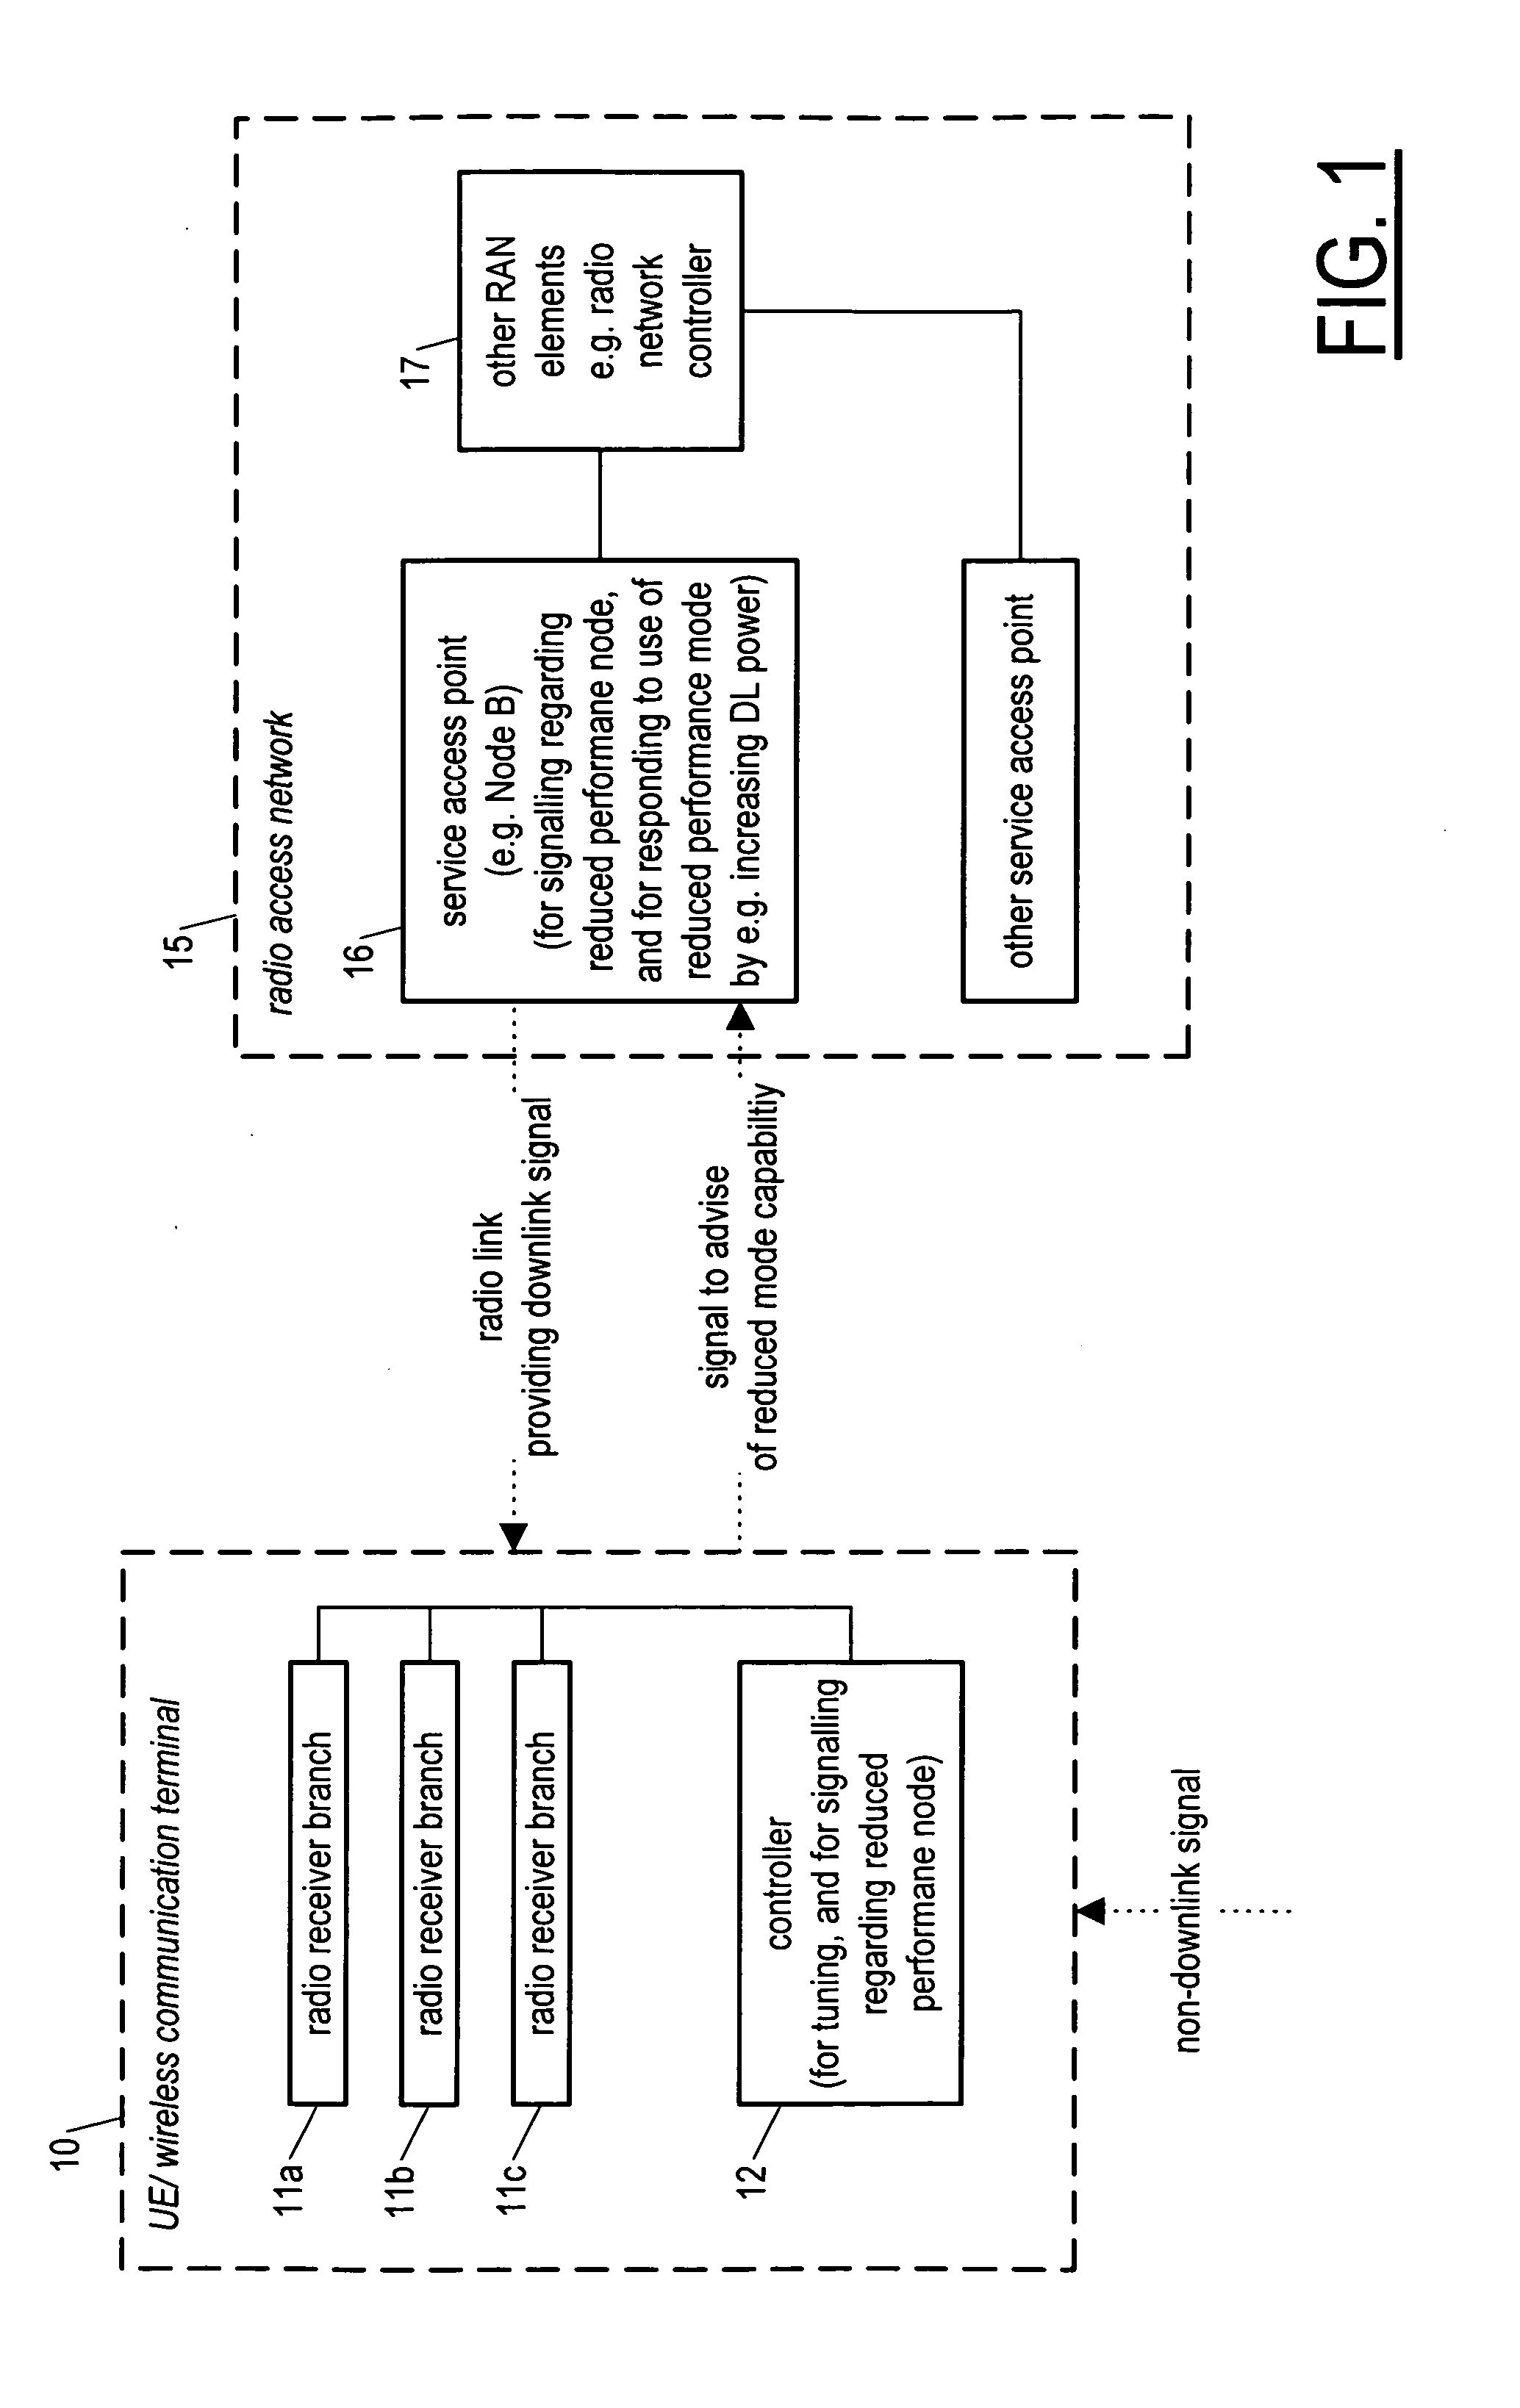 Reduced performance mode of operation for use as needed by a wireless communication terminal